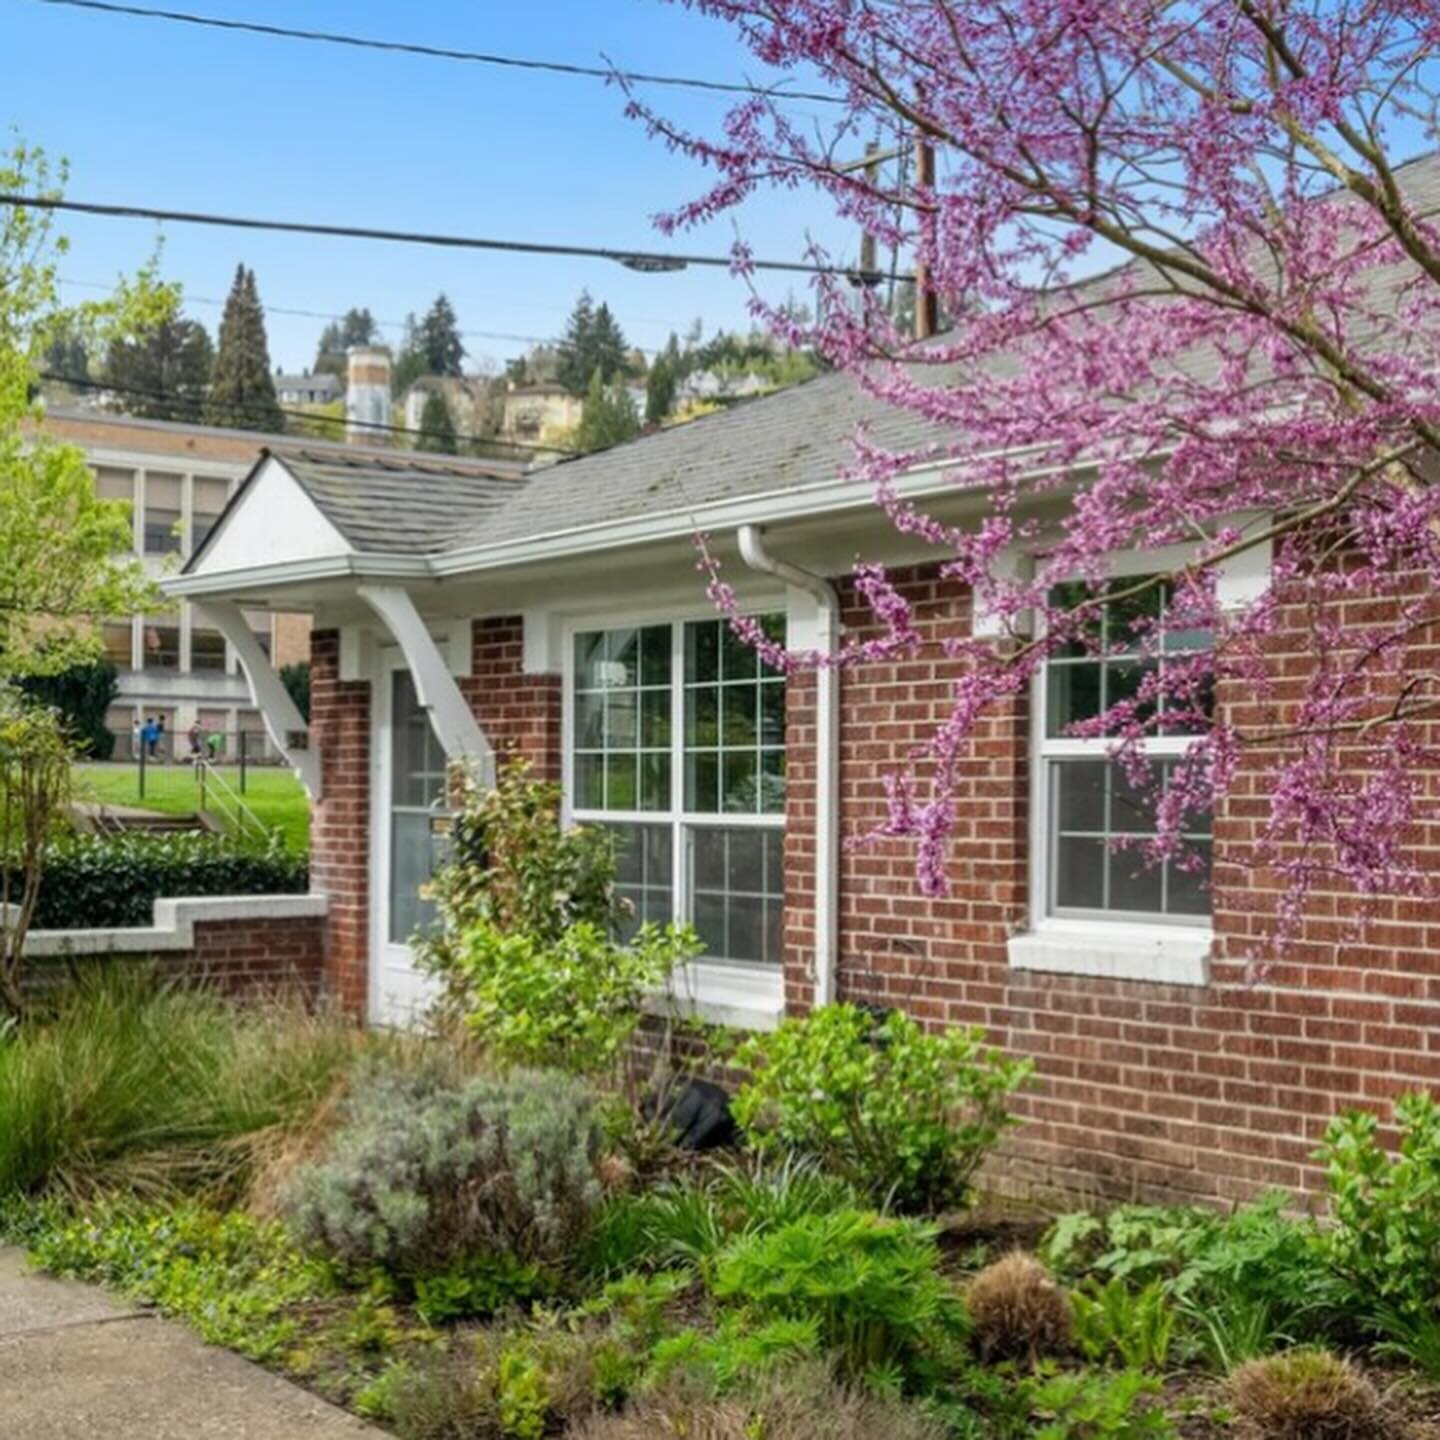 JUST LISTED in the Alphabet District!

Vintage charm, modern updates, and prime access to the best of NW: parks, trails, restaurants, bars, shopping, services, and entertainment, all within steps of a delightfully calm oasis.

This sun-drenched one-l